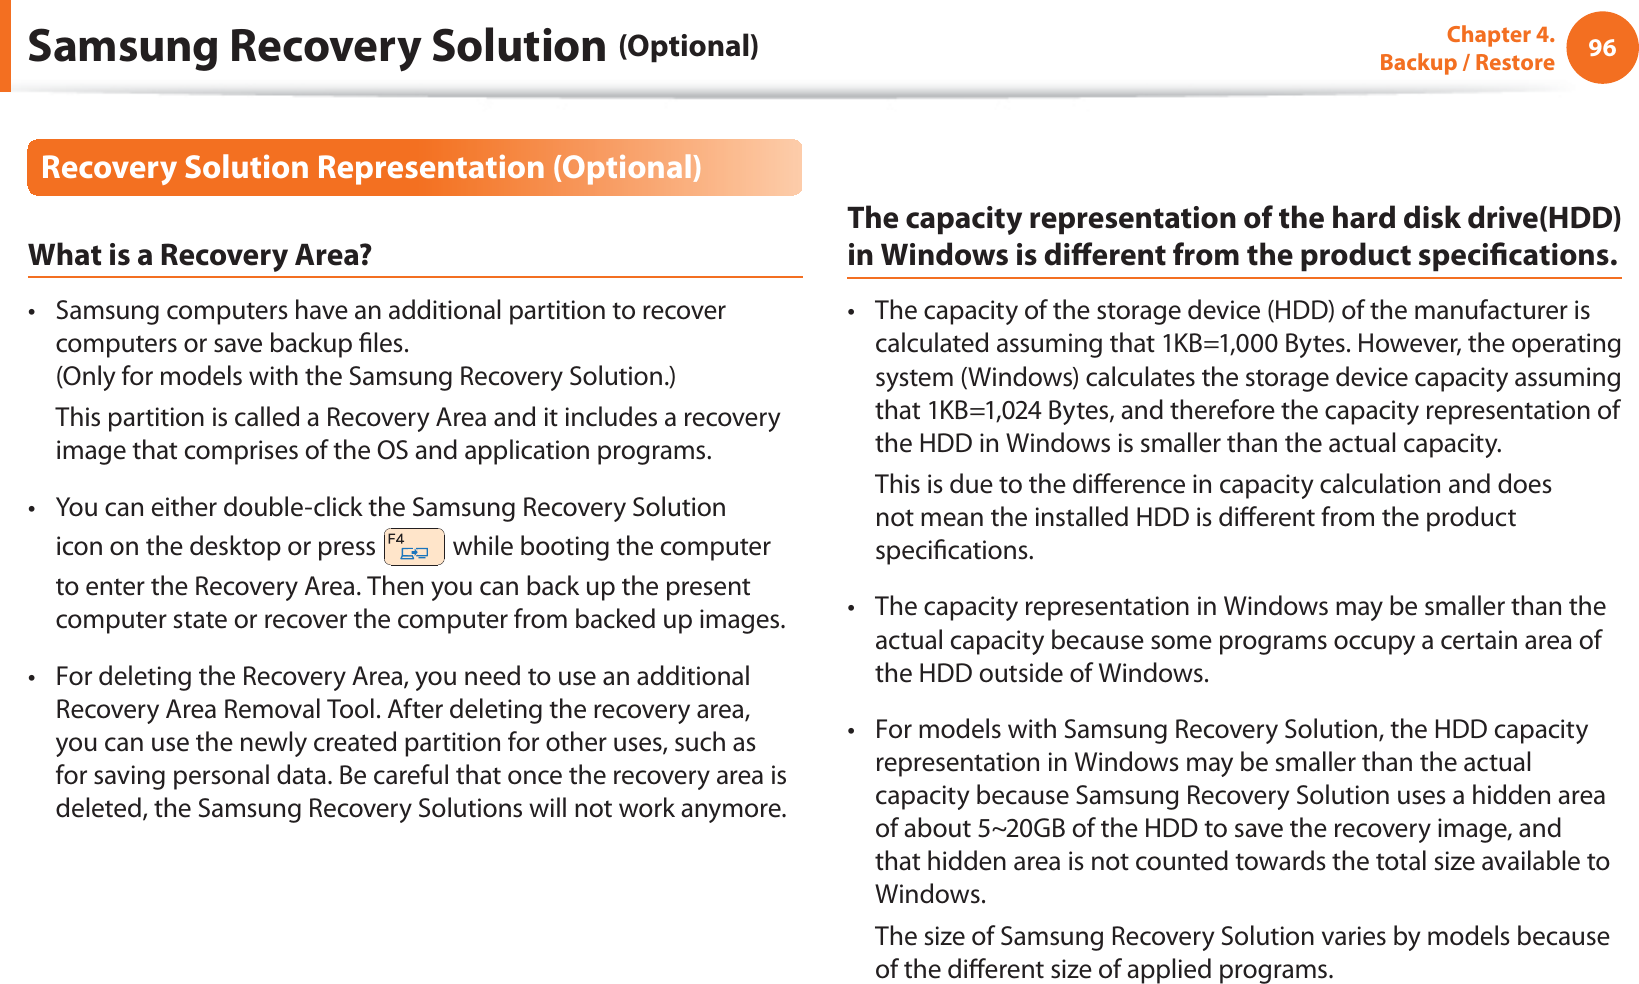 96Chapter  4.   Backup / RestoreRecovery Solution Representation (Optional)What is a Recovery Area?Samsung computers have an additional partition to recover t computers or save backup les. (Only for models with the Samsung Recovery Solution.)  This partition is called a Recovery Area and it includes a recovery image that comprises of the OS and application programs.You can either double-click the Samsung Recovery Solution t icon on the desktop or press   while booting the computer to enter the Recovery Area. Then you can back up the present computer state or recover the computer from backed up images.For deleting the Recovery Area, you need to use an additional t Recovery Area Removal Tool. After deleting the recovery area, you can use the newly created partition for other uses, such as for saving personal data. Be careful that once the recovery area is deleted, the Samsung Recovery Solutions will not work anymore.The capacity representation of the hard disk drive(HDD) in Windows is dierent from the product specications.The capacity of the storage device (HDD) of the manufacturer is t calculated assuming that 1KB=1,000 Bytes. However, the operating system (Windows) calculates the storage device capacity assuming that 1KB=1,024 Bytes, and therefore the capacity representation of the HDD in Windows is smaller than the actual capacity.  This is due to the dierence in capacity calculation and does not mean the installed HDD is dierent from the product specications.The capacity representation in Windows may be smaller than the t actual capacity because some programs occupy a certain area of the HDD outside of Windows.For models with Samsung Recovery Solution, the HDD capacity t representation in Windows may be smaller than the actual capacity because Samsung Recovery Solution uses a hidden area of about 5~20GB of the HDD to save the recovery image, and that hidden area is not counted towards the total size available to Windows.  The size of Samsung Recovery Solution varies by models because of the dierent size of applied programs.Samsung Recovery Solution (Optional)